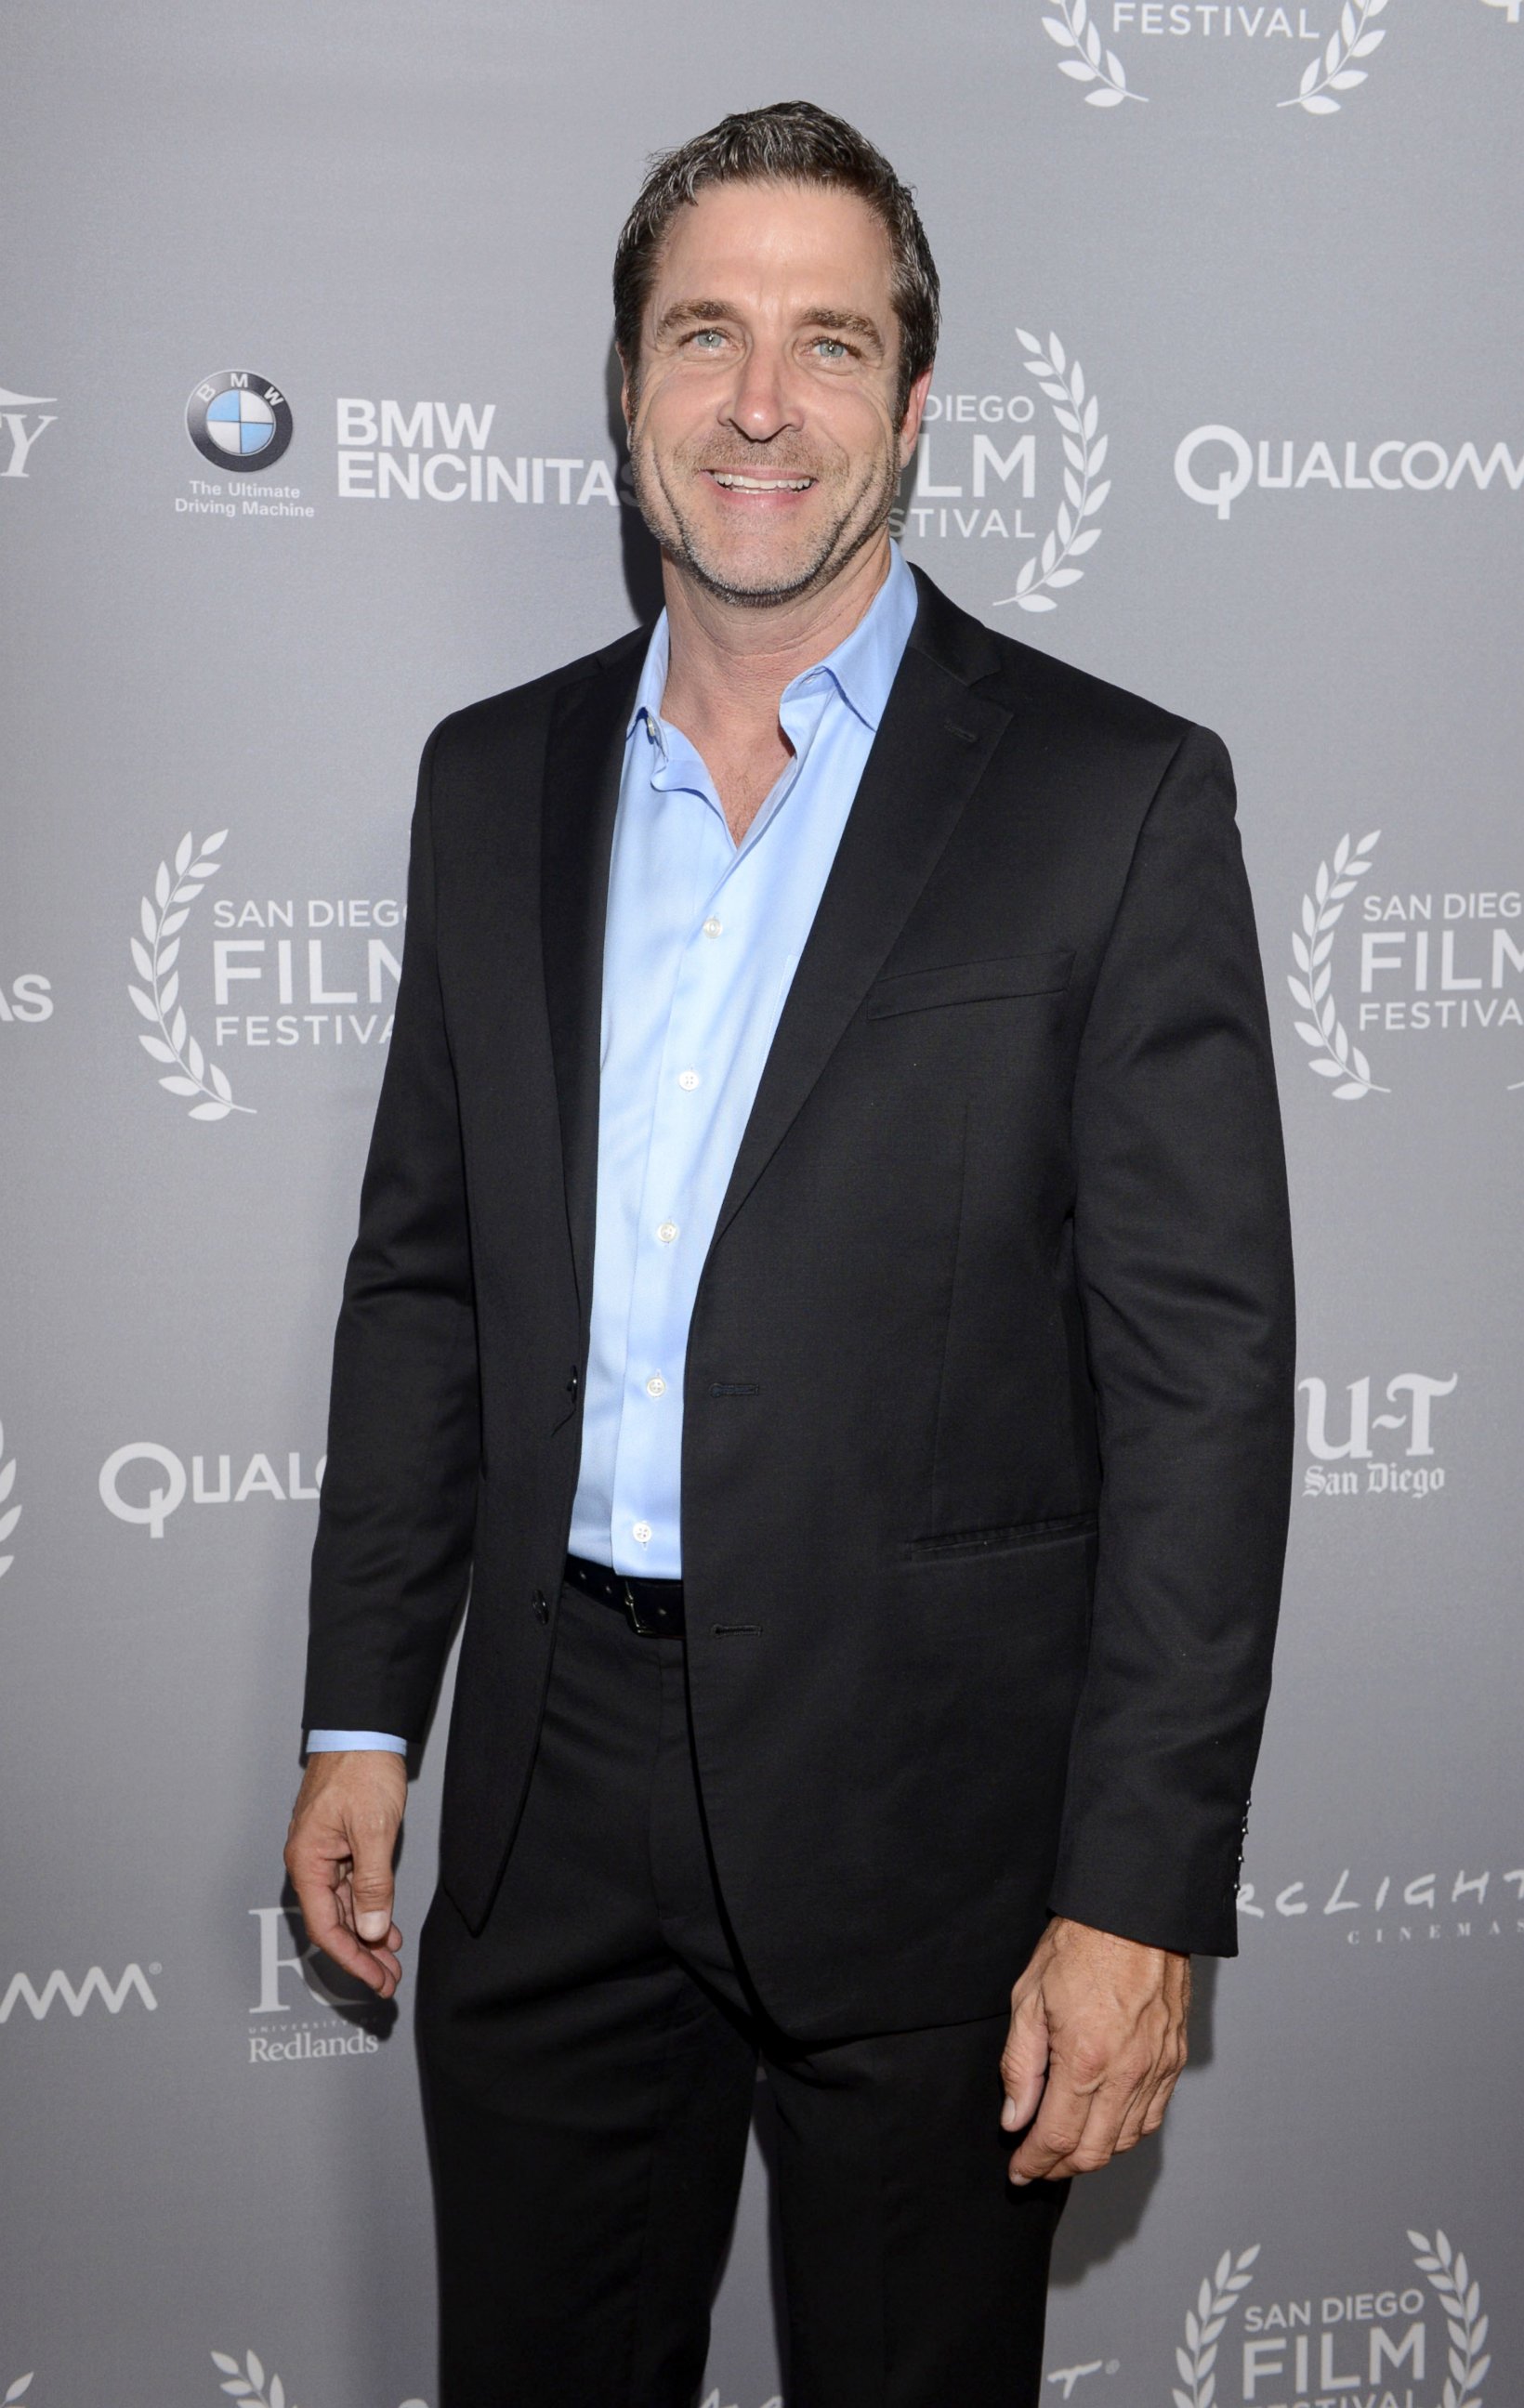 PHOTO: Ben Reed attends the opening night tribute at the San Diego Film Festival 2014, Sept. 27, 2014, in San Diego.